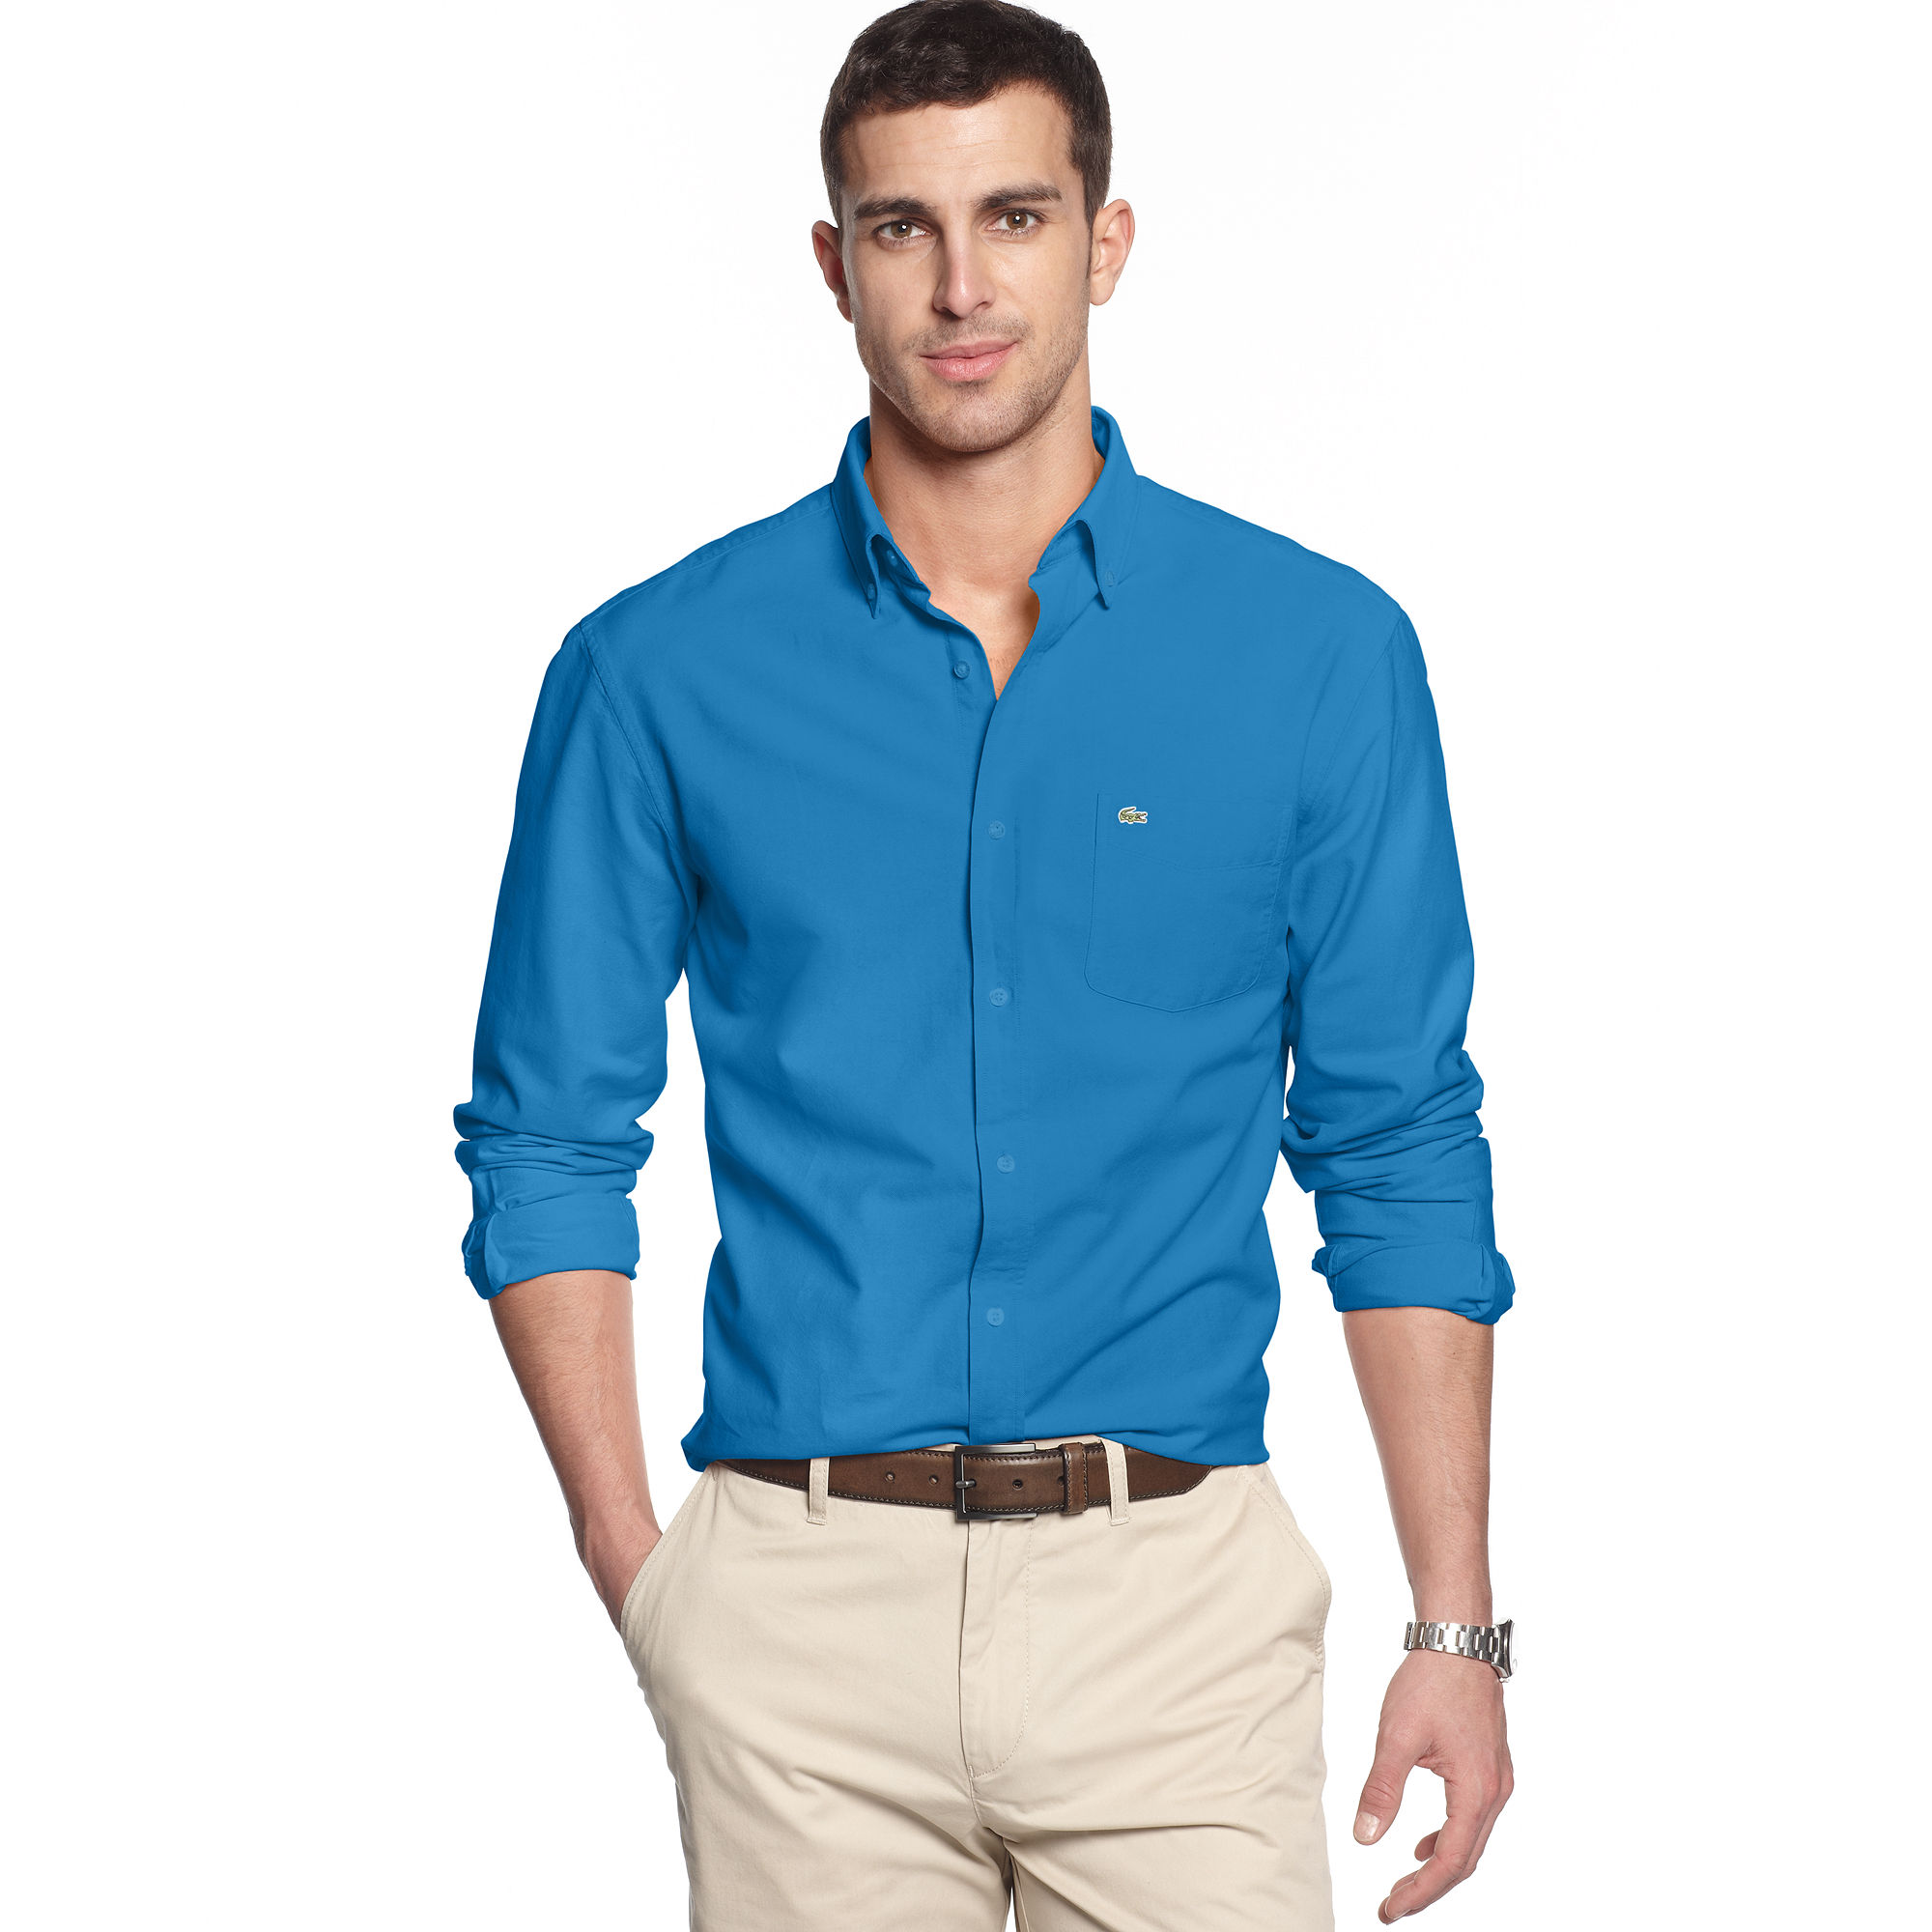 With regular-fit shirts for an individual look